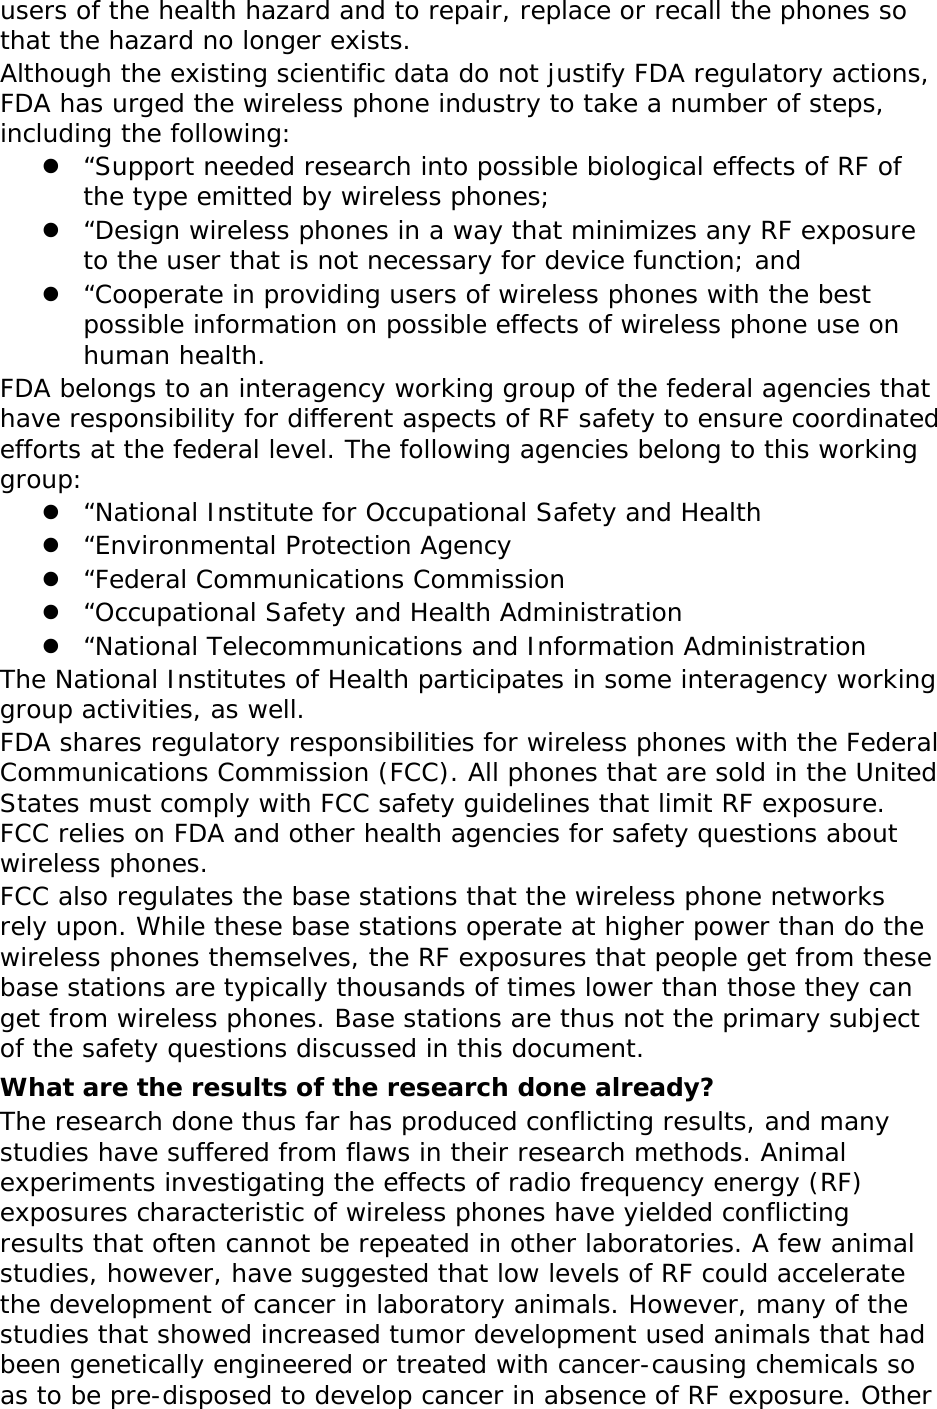 users of the health hazard and to repair, replace or recall the phones so that the hazard no longer exists. Although the existing scientific data do not justify FDA regulatory actions, FDA has urged the wireless phone industry to take a number of steps, including the following:  “Support needed research into possible biological effects of RF of the type emitted by wireless phones;  “Design wireless phones in a way that minimizes any RF exposure to the user that is not necessary for device function; and  “Cooperate in providing users of wireless phones with the best possible information on possible effects of wireless phone use on human health. FDA belongs to an interagency working group of the federal agencies that have responsibility for different aspects of RF safety to ensure coordinated efforts at the federal level. The following agencies belong to this working group:  “National Institute for Occupational Safety and Health  “Environmental Protection Agency  “Federal Communications Commission  “Occupational Safety and Health Administration  “National Telecommunications and Information Administration The National Institutes of Health participates in some interagency working group activities, as well. FDA shares regulatory responsibilities for wireless phones with the Federal Communications Commission (FCC). All phones that are sold in the United States must comply with FCC safety guidelines that limit RF exposure. FCC relies on FDA and other health agencies for safety questions about wireless phones. FCC also regulates the base stations that the wireless phone networks rely upon. While these base stations operate at higher power than do the wireless phones themselves, the RF exposures that people get from these base stations are typically thousands of times lower than those they can get from wireless phones. Base stations are thus not the primary subject of the safety questions discussed in this document. What are the results of the research done already? The research done thus far has produced conflicting results, and many studies have suffered from flaws in their research methods. Animal experiments investigating the effects of radio frequency energy (RF) exposures characteristic of wireless phones have yielded conflicting results that often cannot be repeated in other laboratories. A few animal studies, however, have suggested that low levels of RF could accelerate the development of cancer in laboratory animals. However, many of the studies that showed increased tumor development used animals that had been genetically engineered or treated with cancer-causing chemicals so as to be pre-disposed to develop cancer in absence of RF exposure. Other 